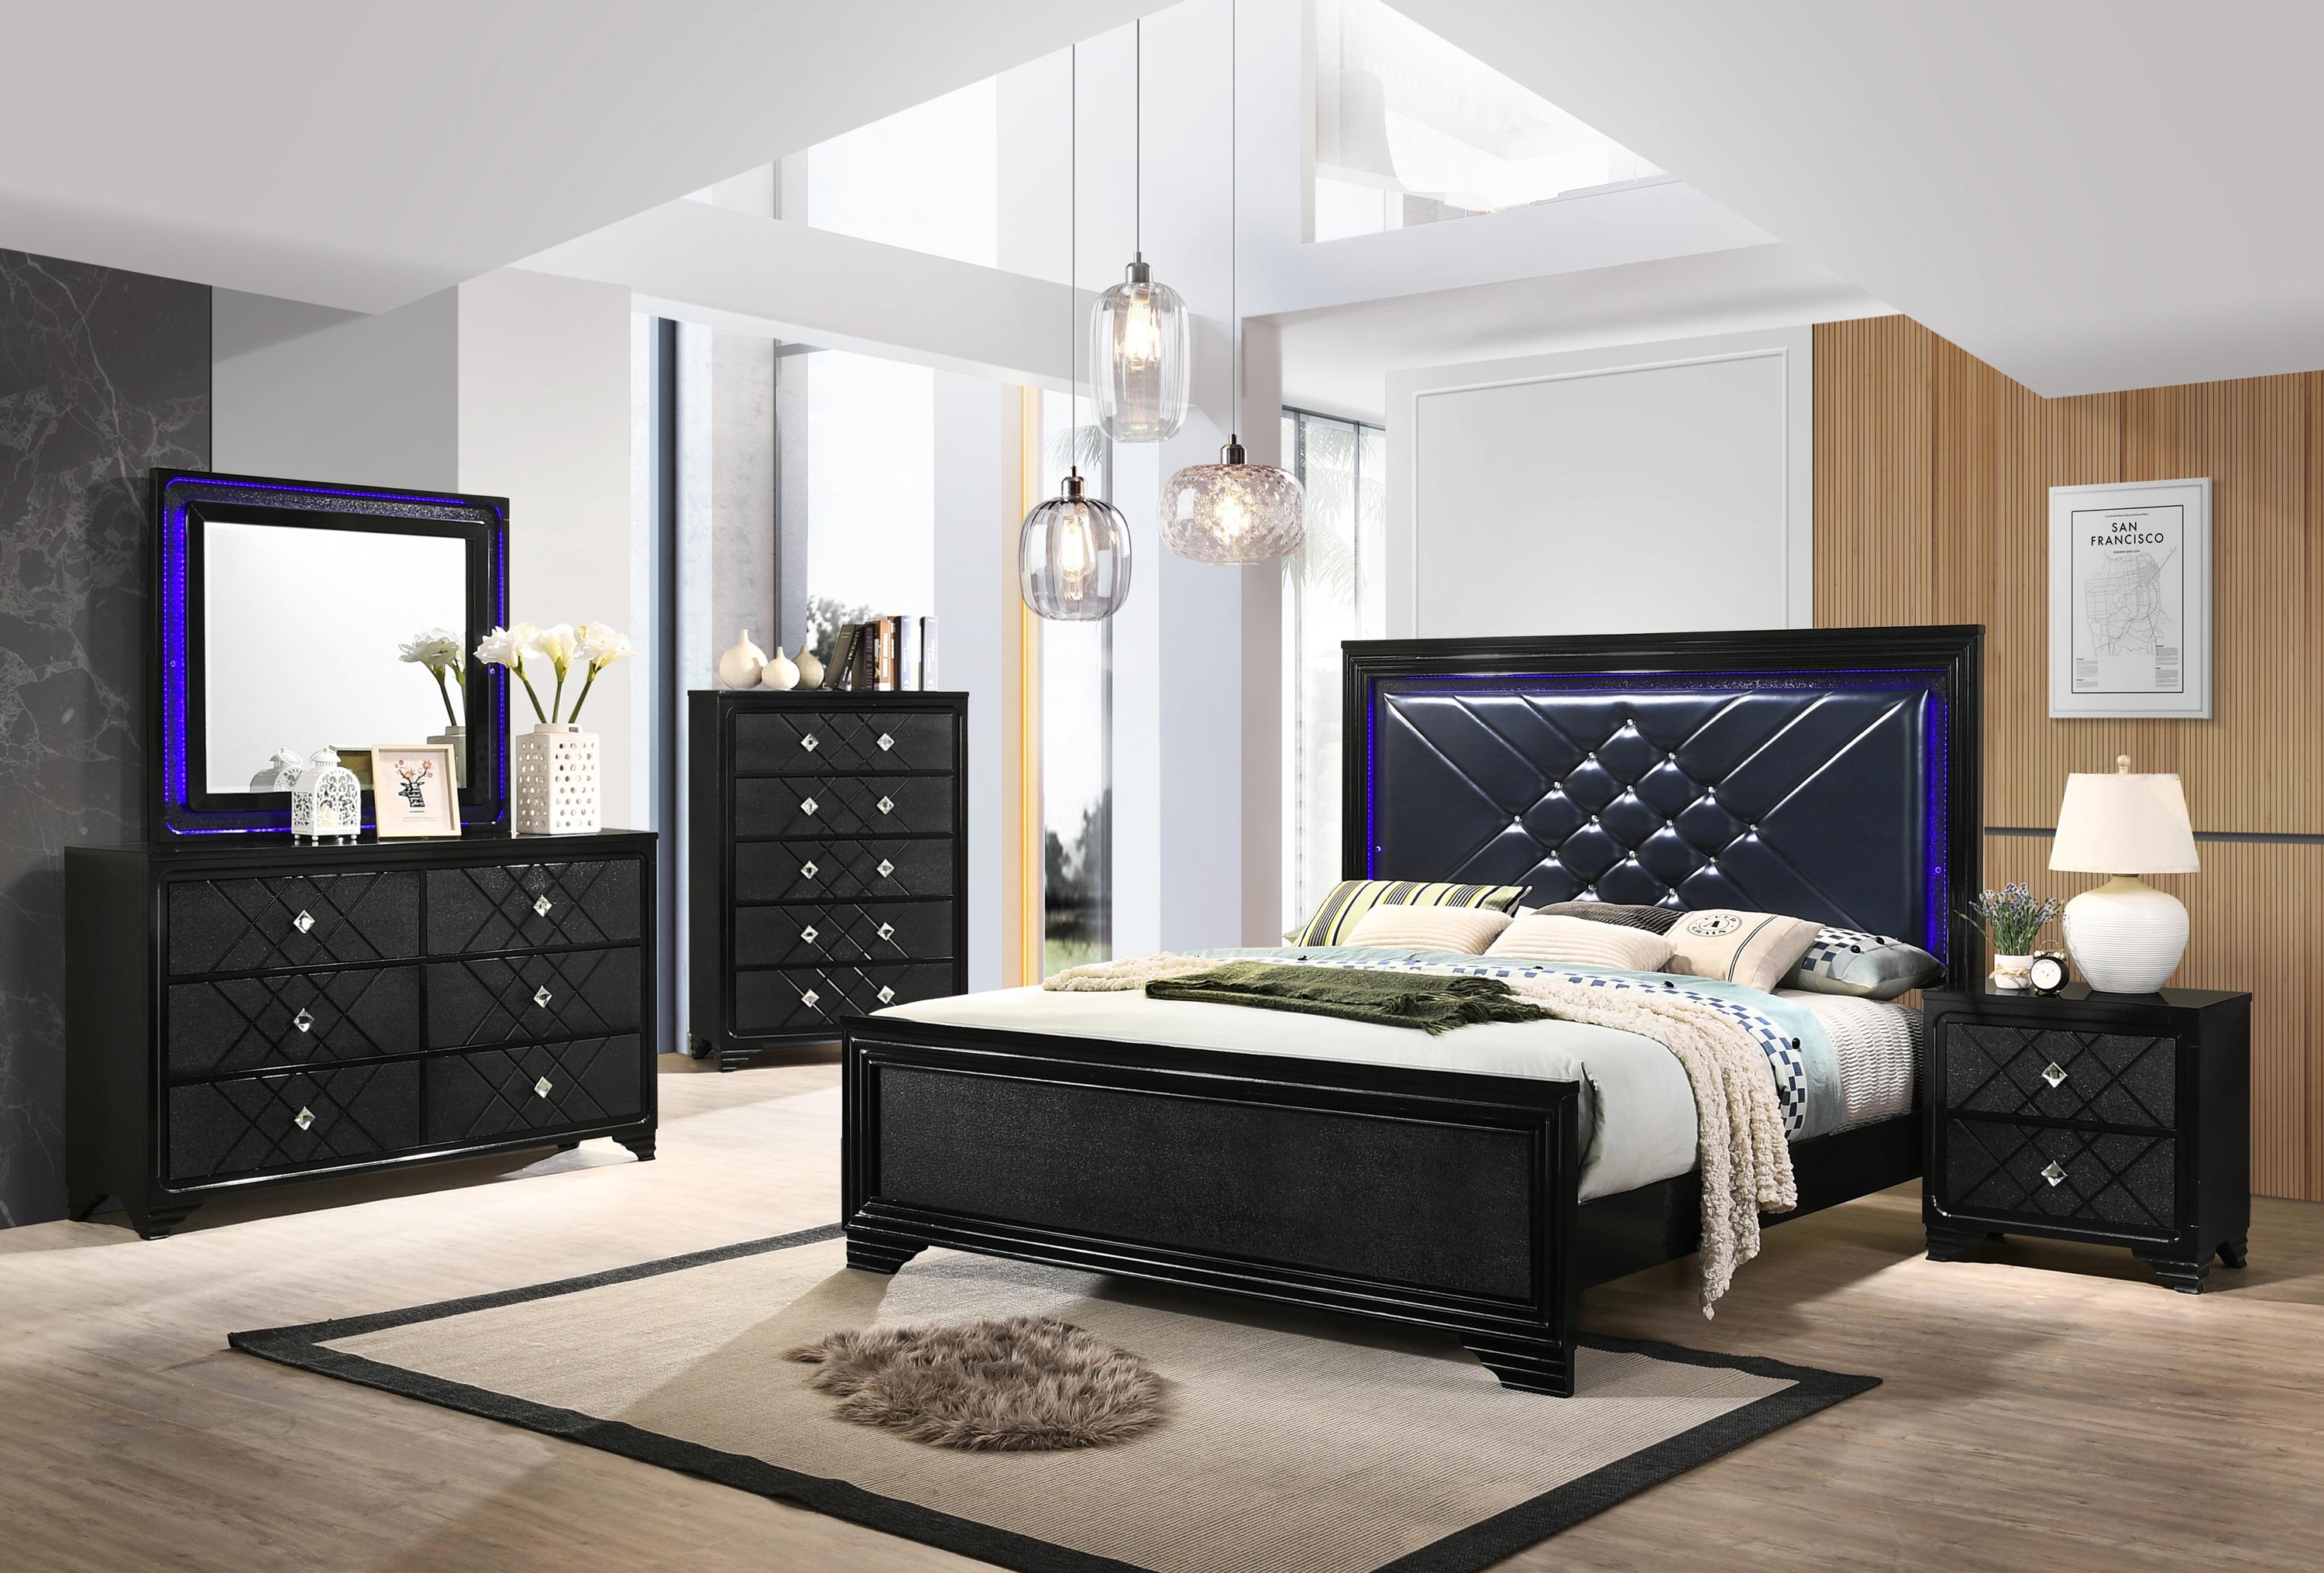 Contemporary Bedroom Set 223571KW-5PC Penelope 223571KW-5PC in Black Leatherette